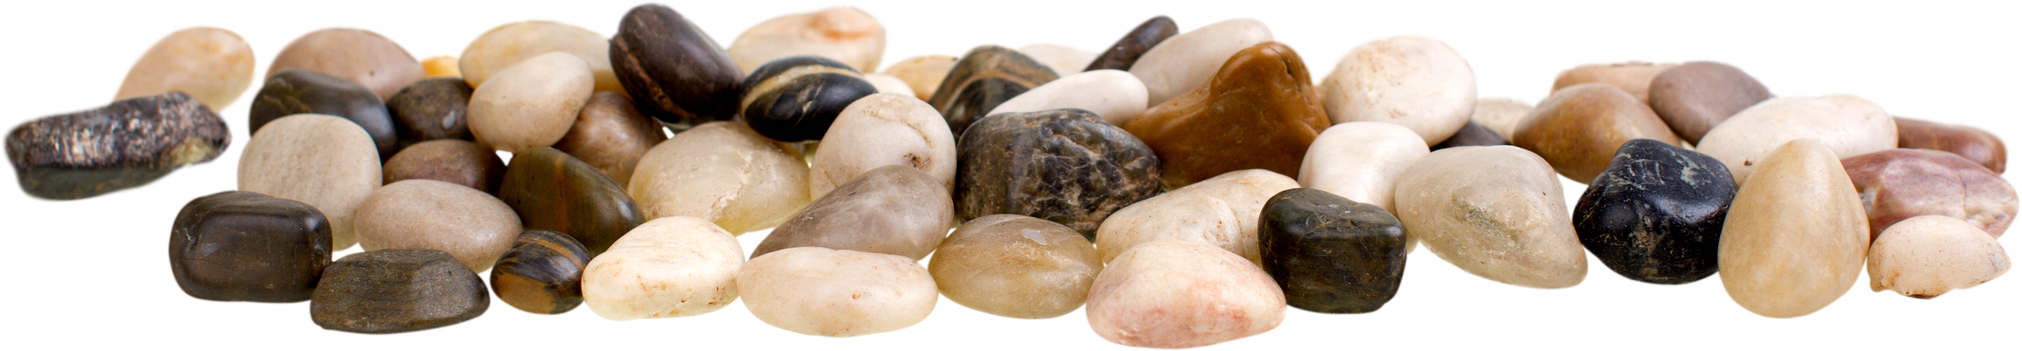 Pebbles Isolated